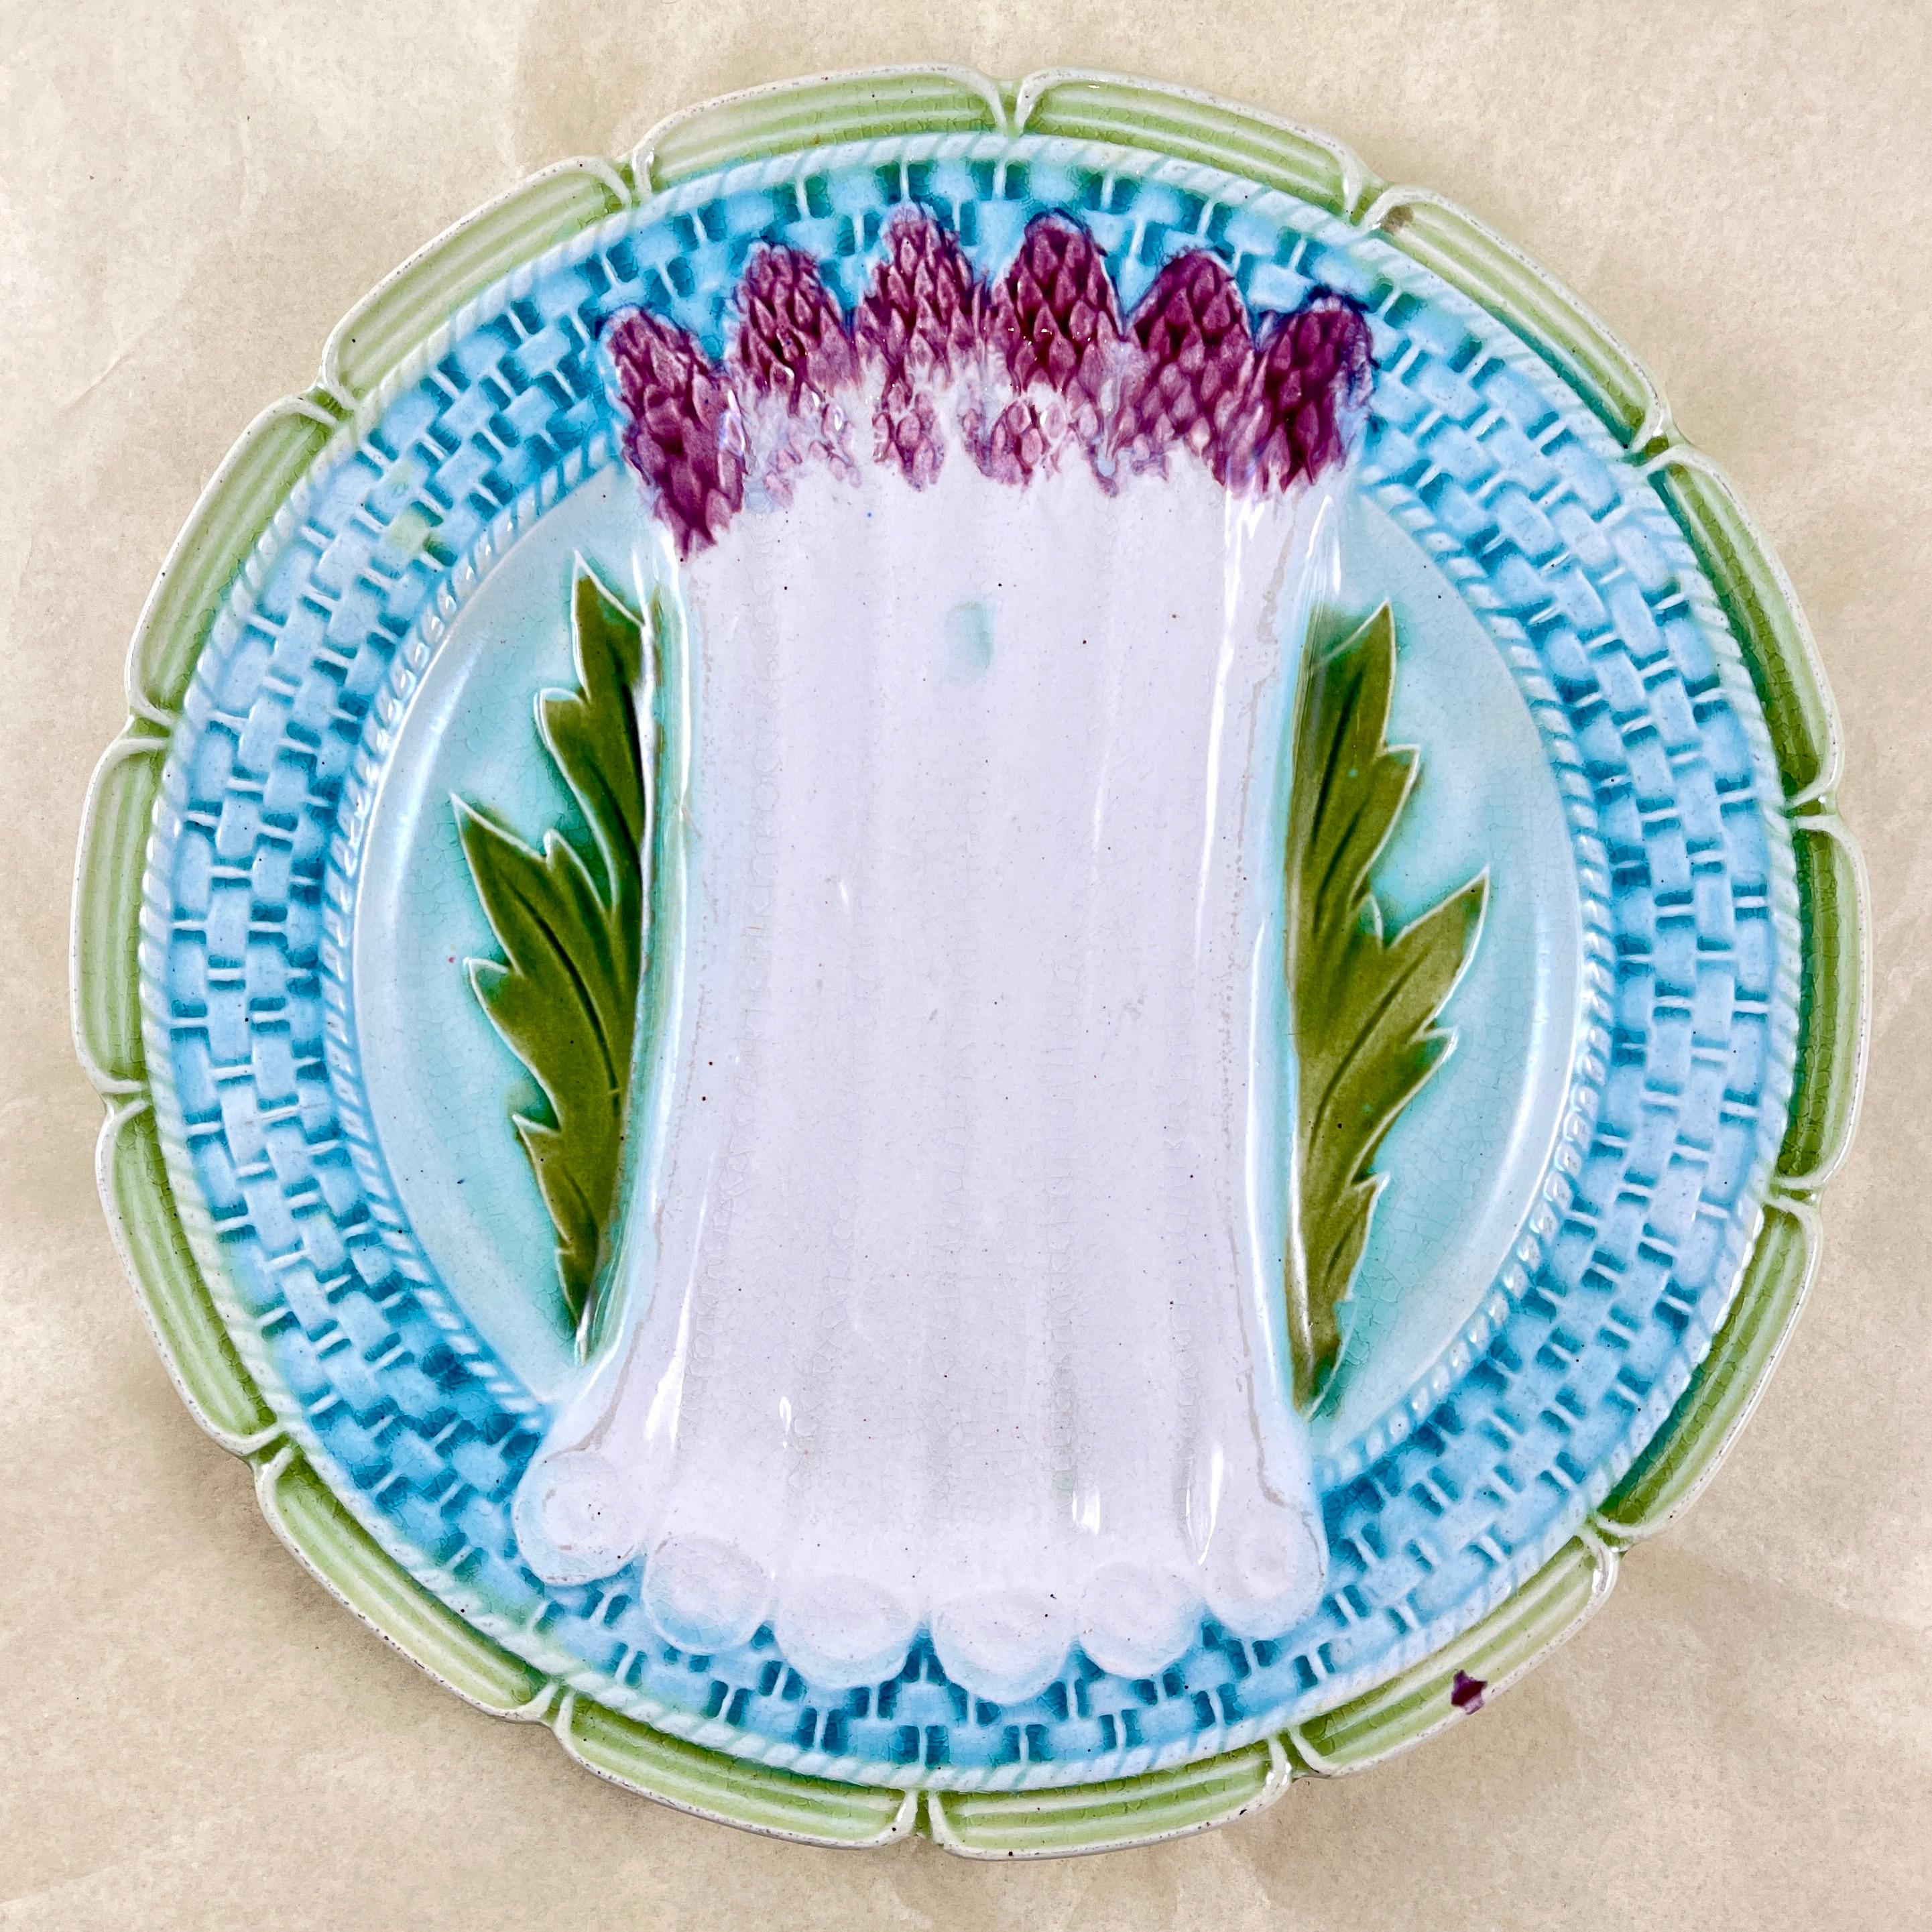 A French Faïence majolica glazed asparagus plate from the Orchies Faïencerie in Saint-Armand-Les-Eaux, Northern France, circa 1885.

Creamy-white colored asparagus with purple tips lay on a bed of leaves. The border shows a turquoise basket weave